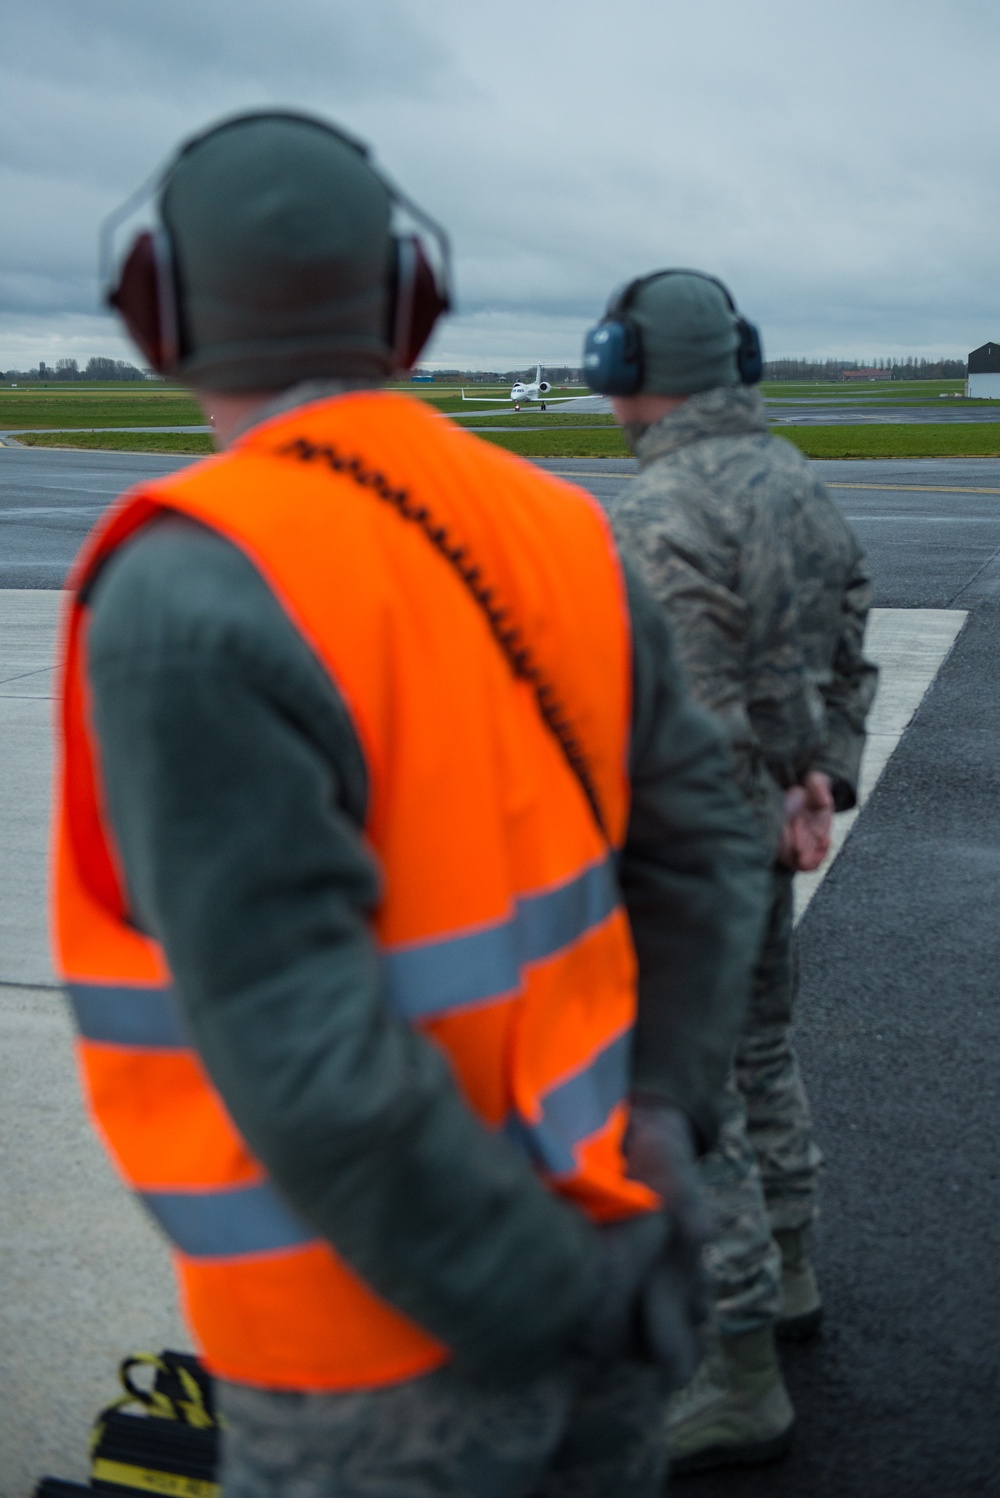 Chief Master Sgt. of the Air Force James Cody visits 424th ABS in Belgium